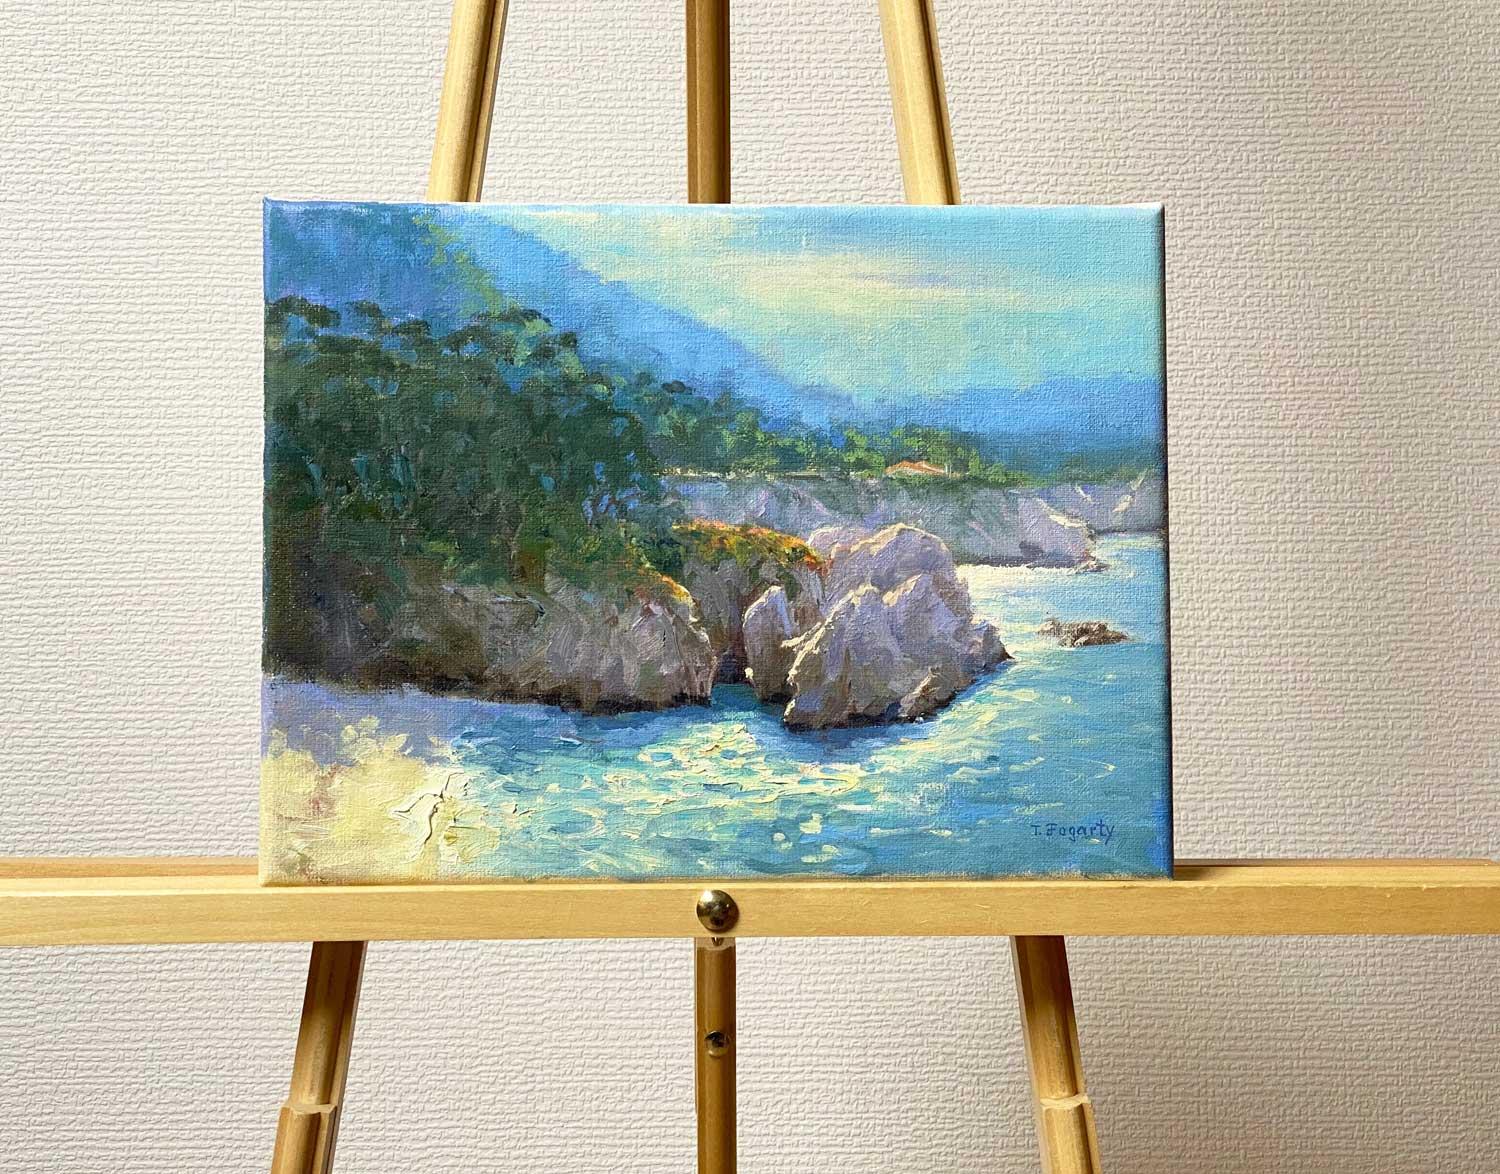 <p>Artist Comments<br />Tatyana was inspired by the shimmering water, reflections and shadowed cliffs surrounding Gibson Beach in Point Lobos, near Carmel, CA. Late afternoon sun peeks through the gently overcast sky, lighting up the landscape. 